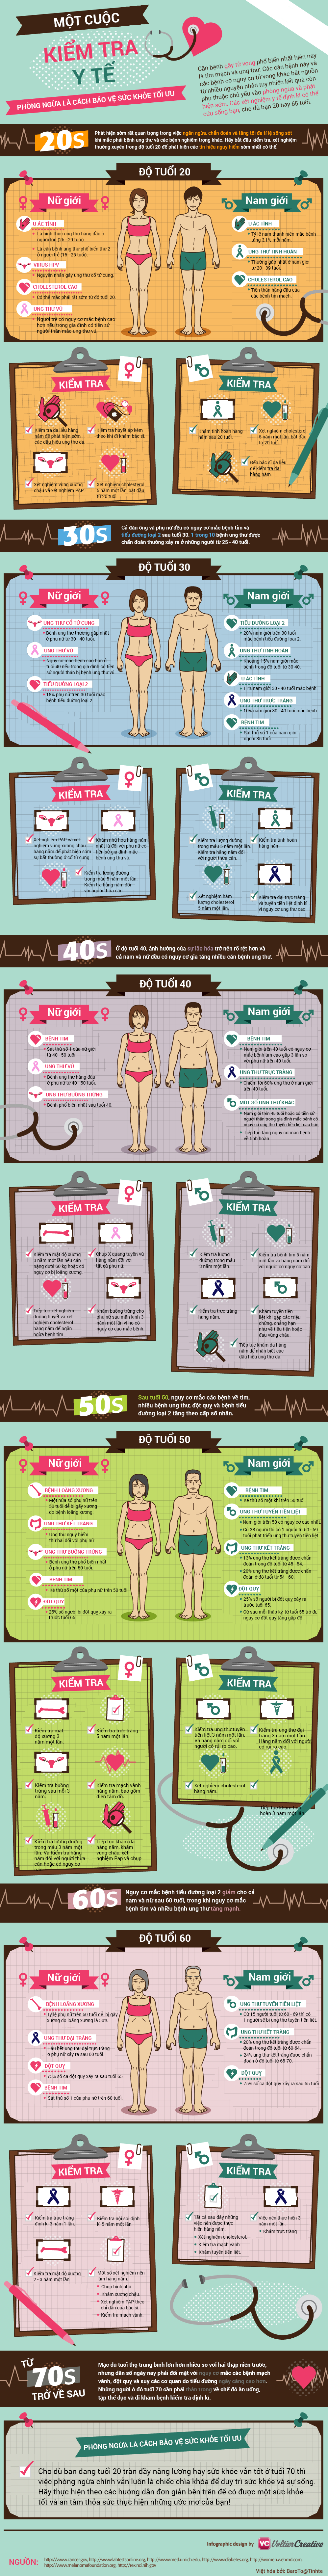 A-Lifetime-of-Medical-Checkups-Infographic.png